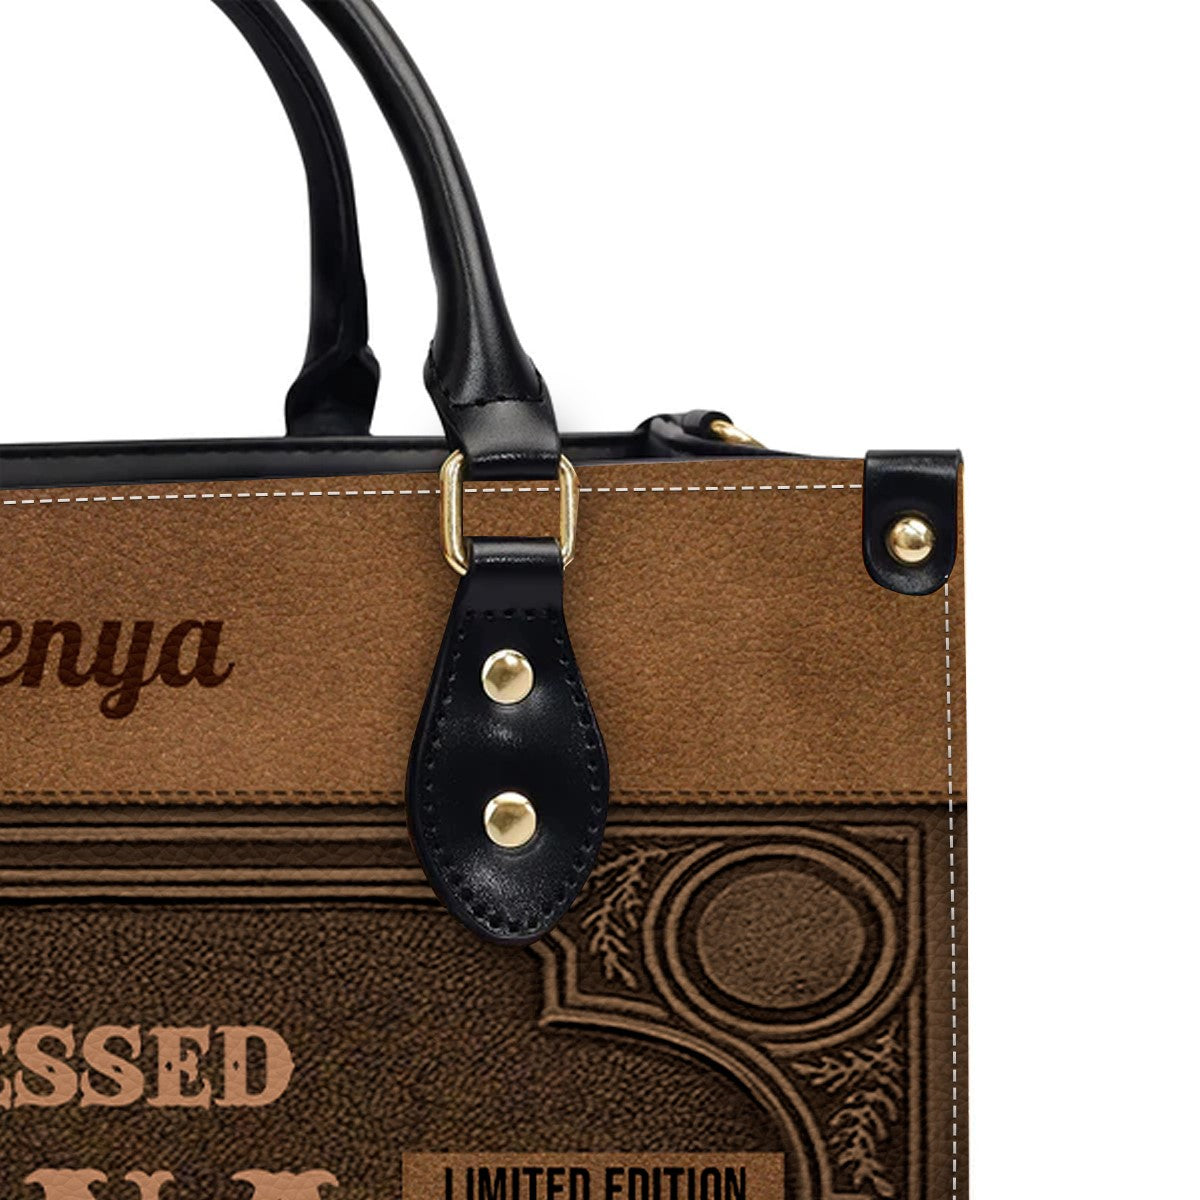 Personalized Leather Handbag - Customizable Blessed Nana Tote by CHRISTIANARTBAG CABLTHB01100424.